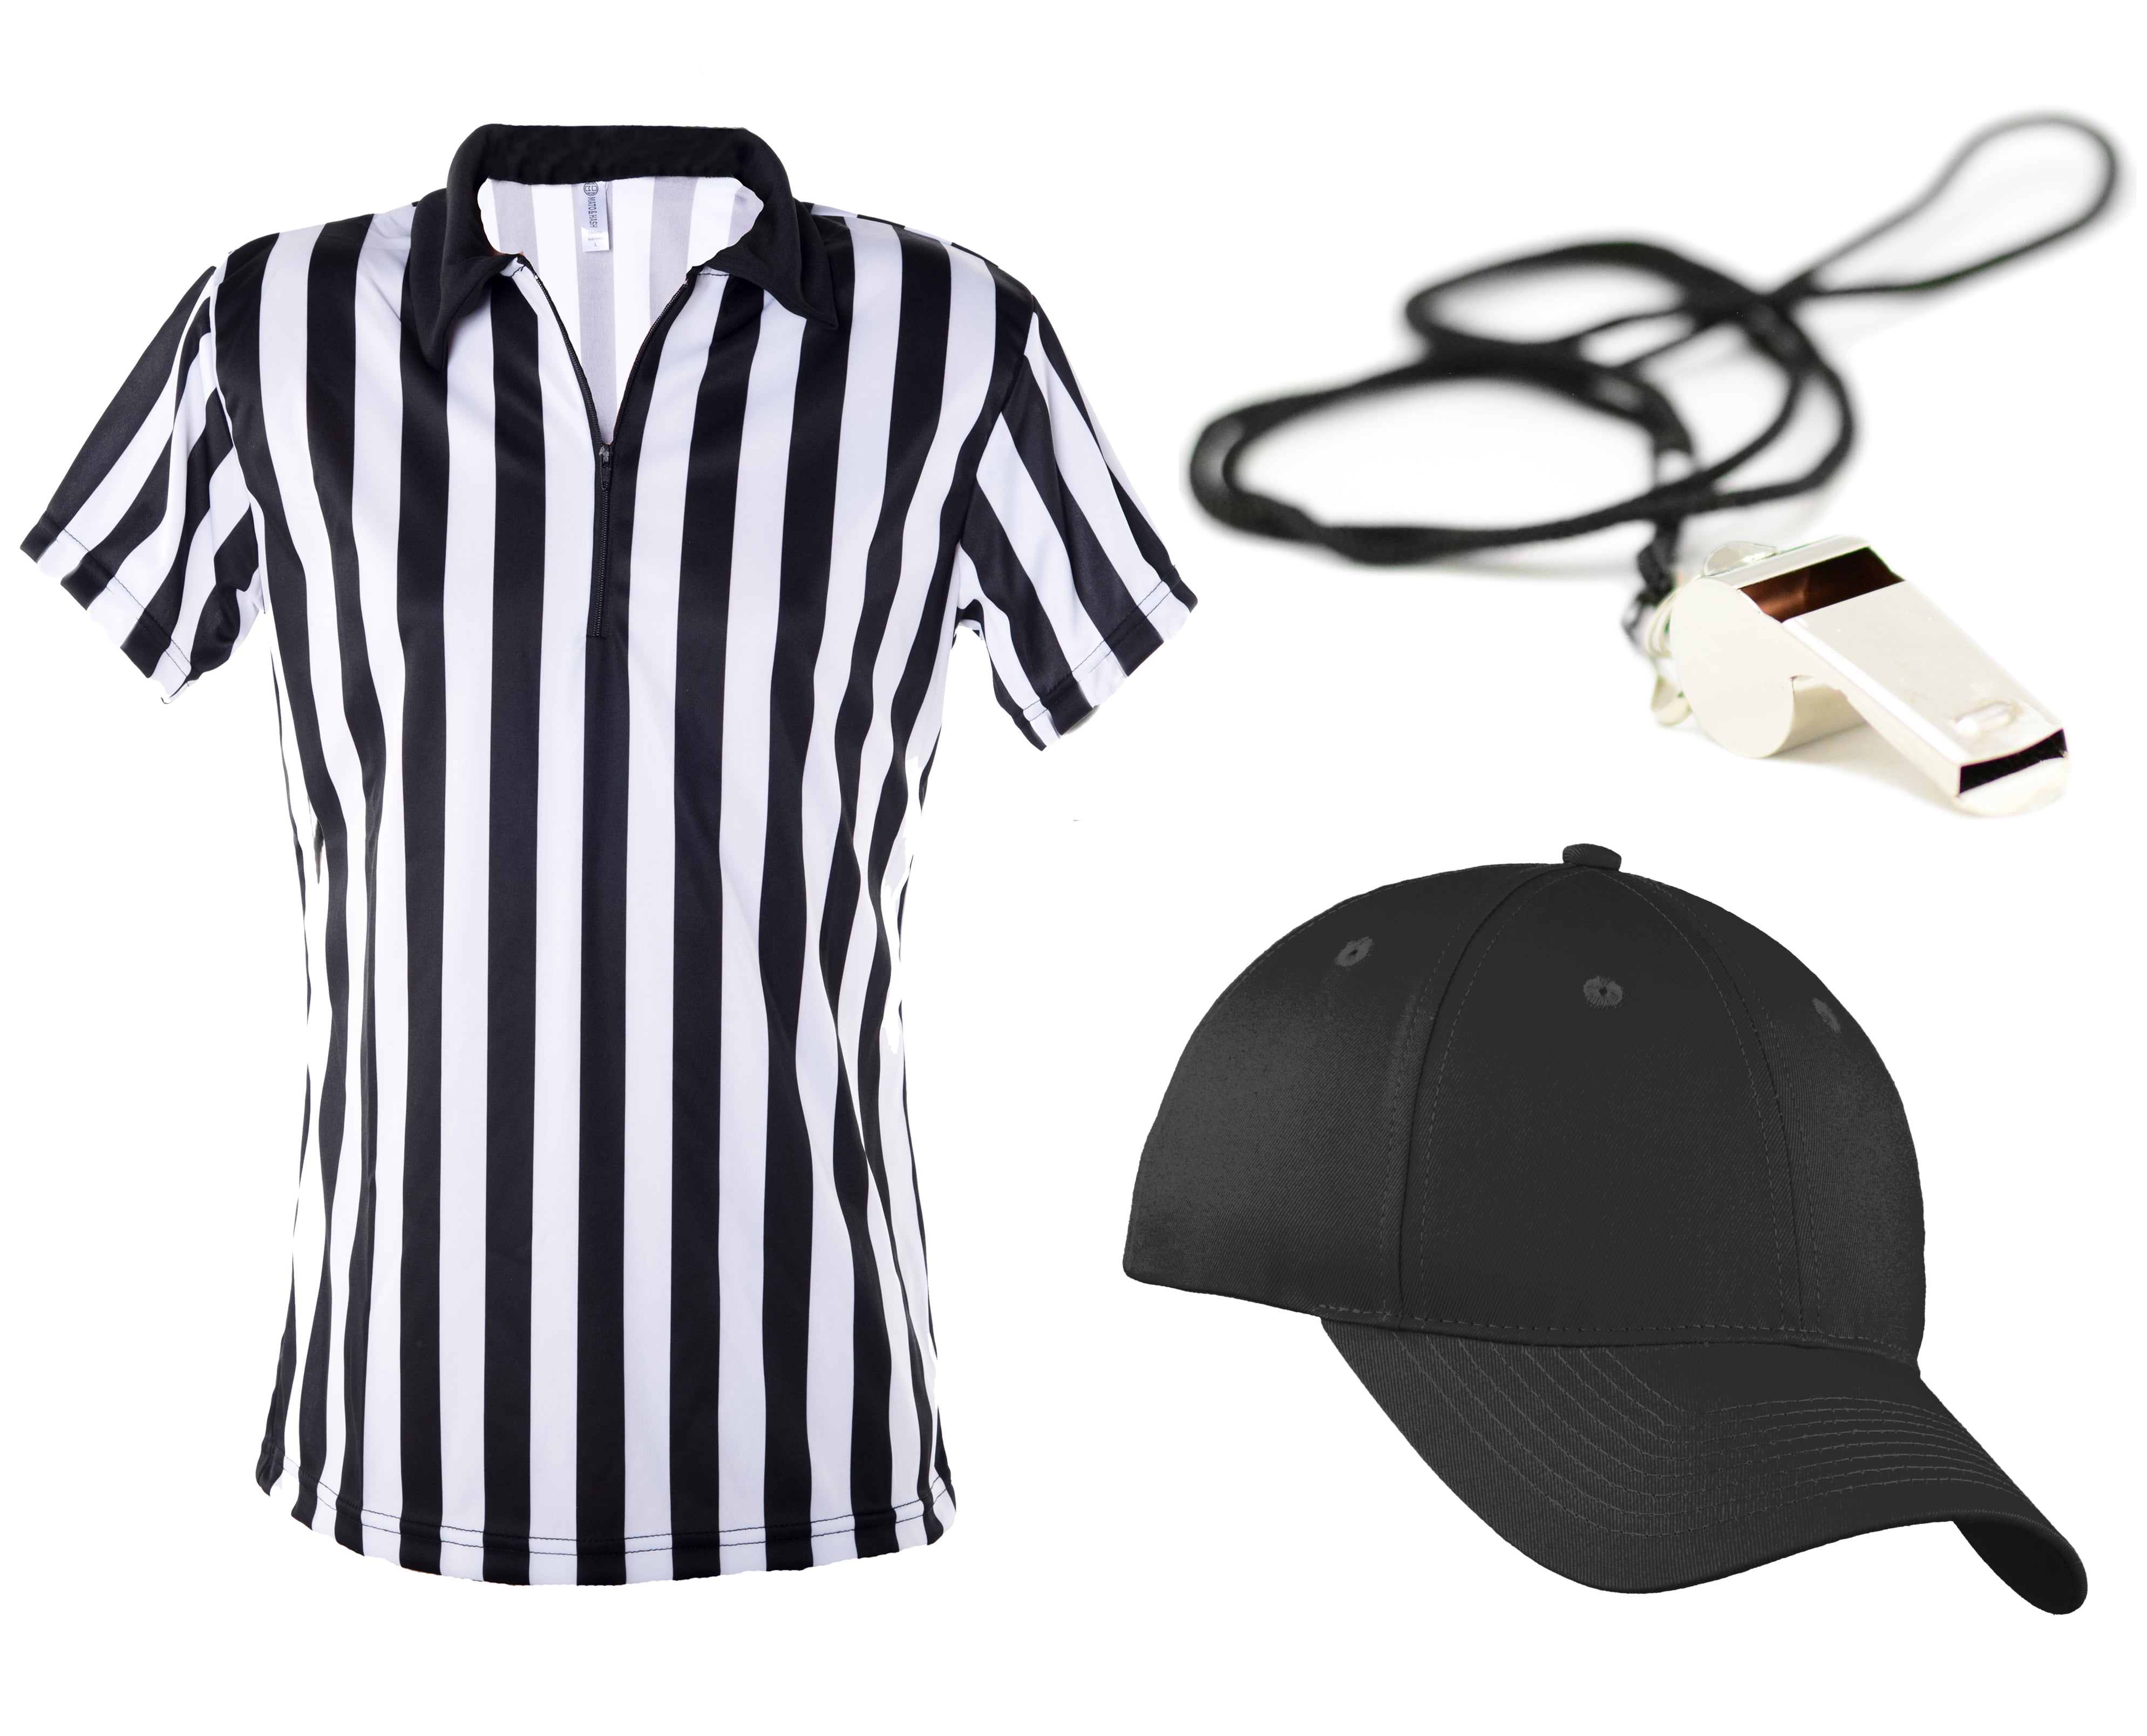 Mato & Hash Mens Referee Shirts/Umpire Jersey with Collar for Officiating More! Costumes